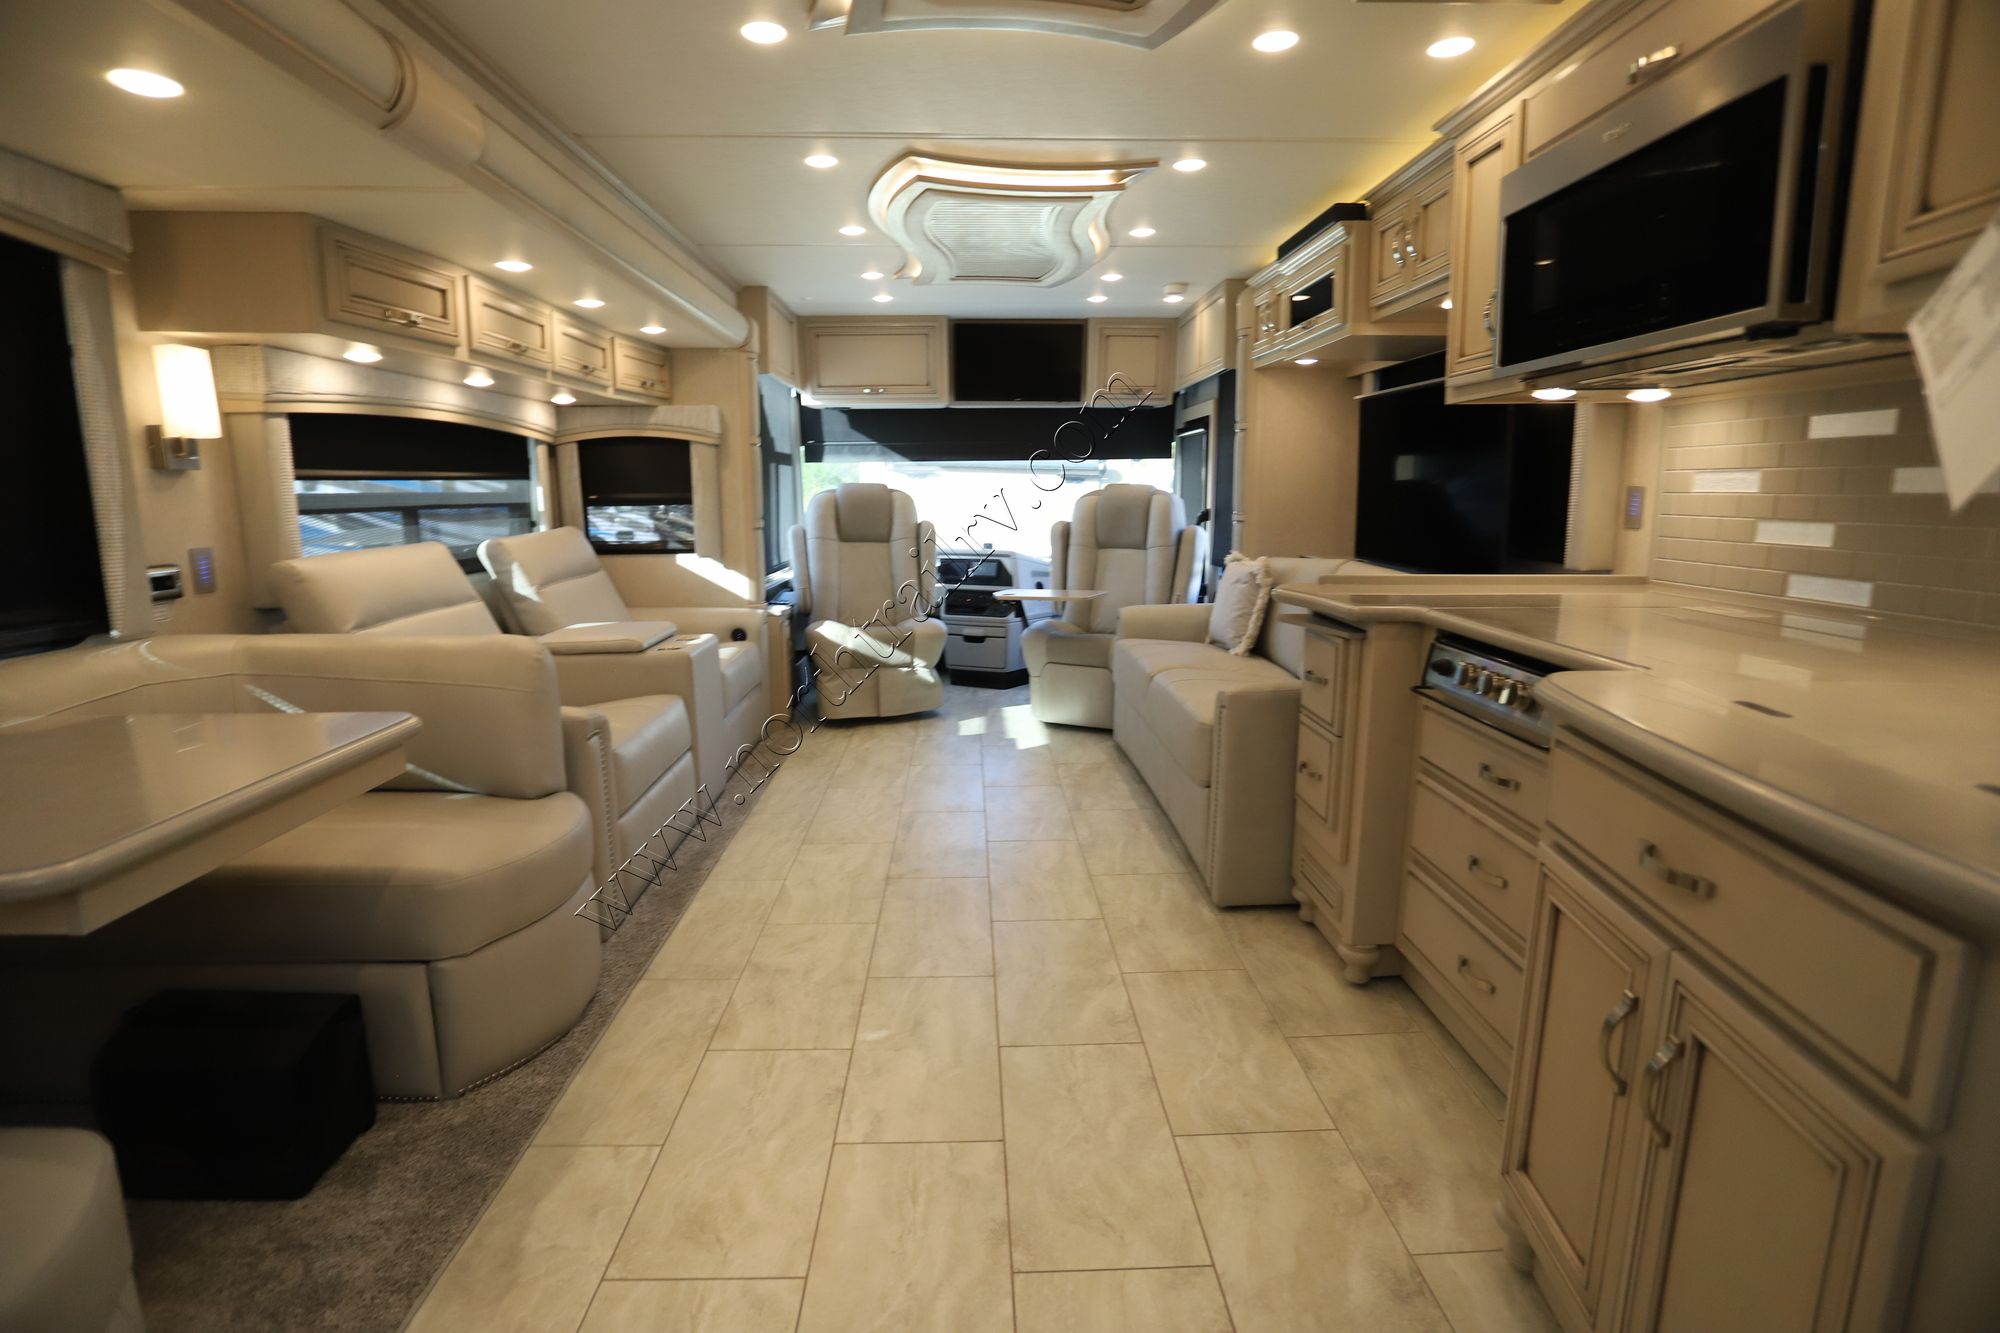 New 2023 Newmar Kountry Star 4037 Class A  For Sale